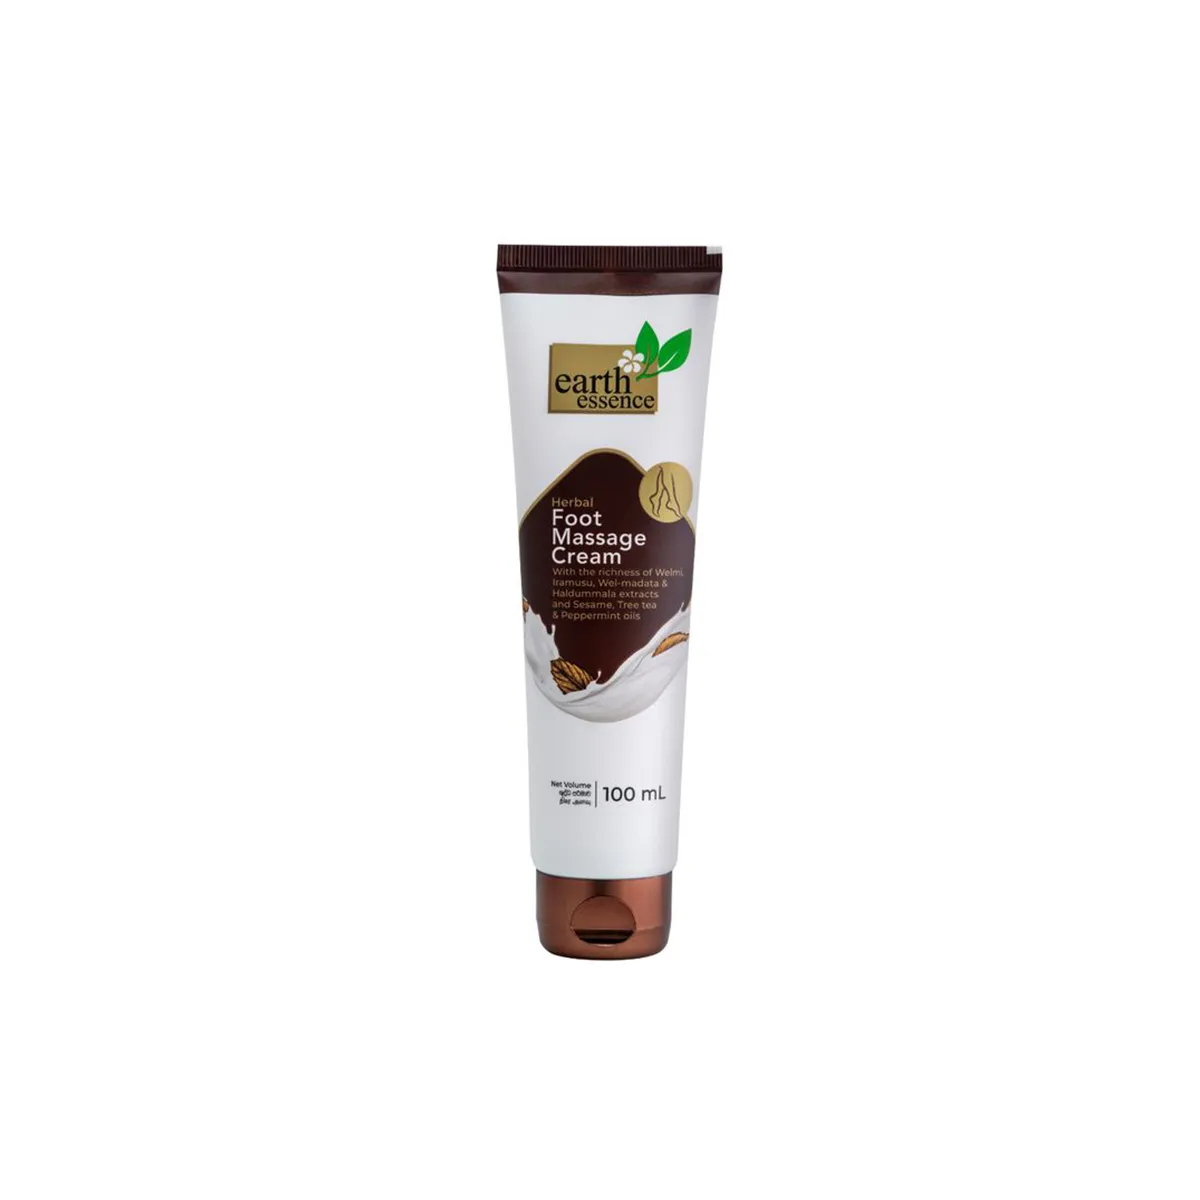 First product image of Earth Essence Foot Massage Cream 100ml